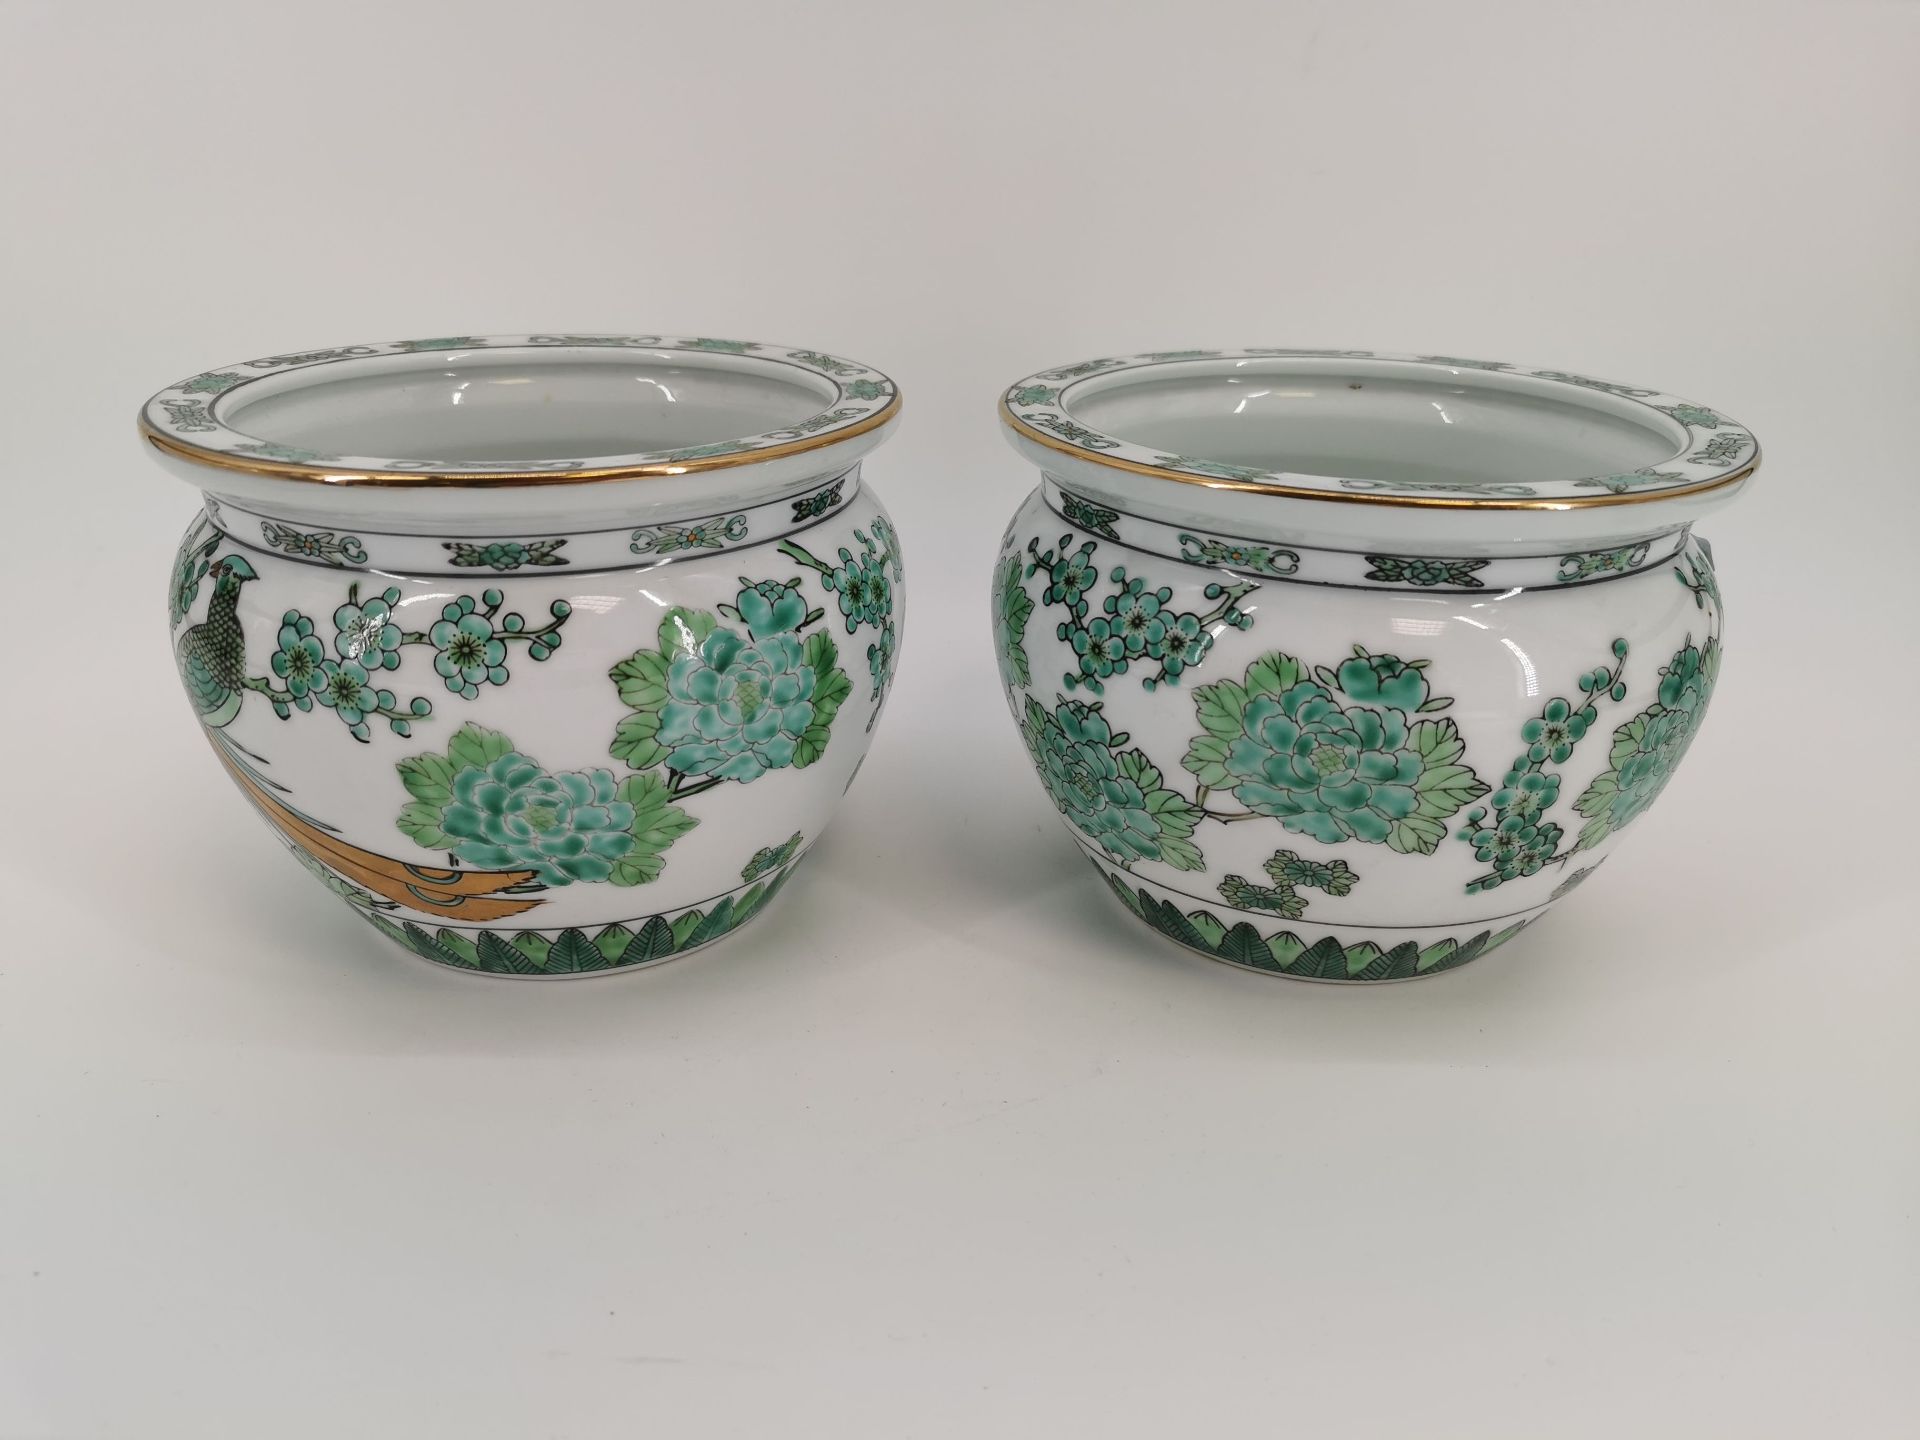 PAIR OF CACHEPOTS, Imari porcelain, Japan, marked "Goldimari" and "handpainted" under the stand. - Image 3 of 4